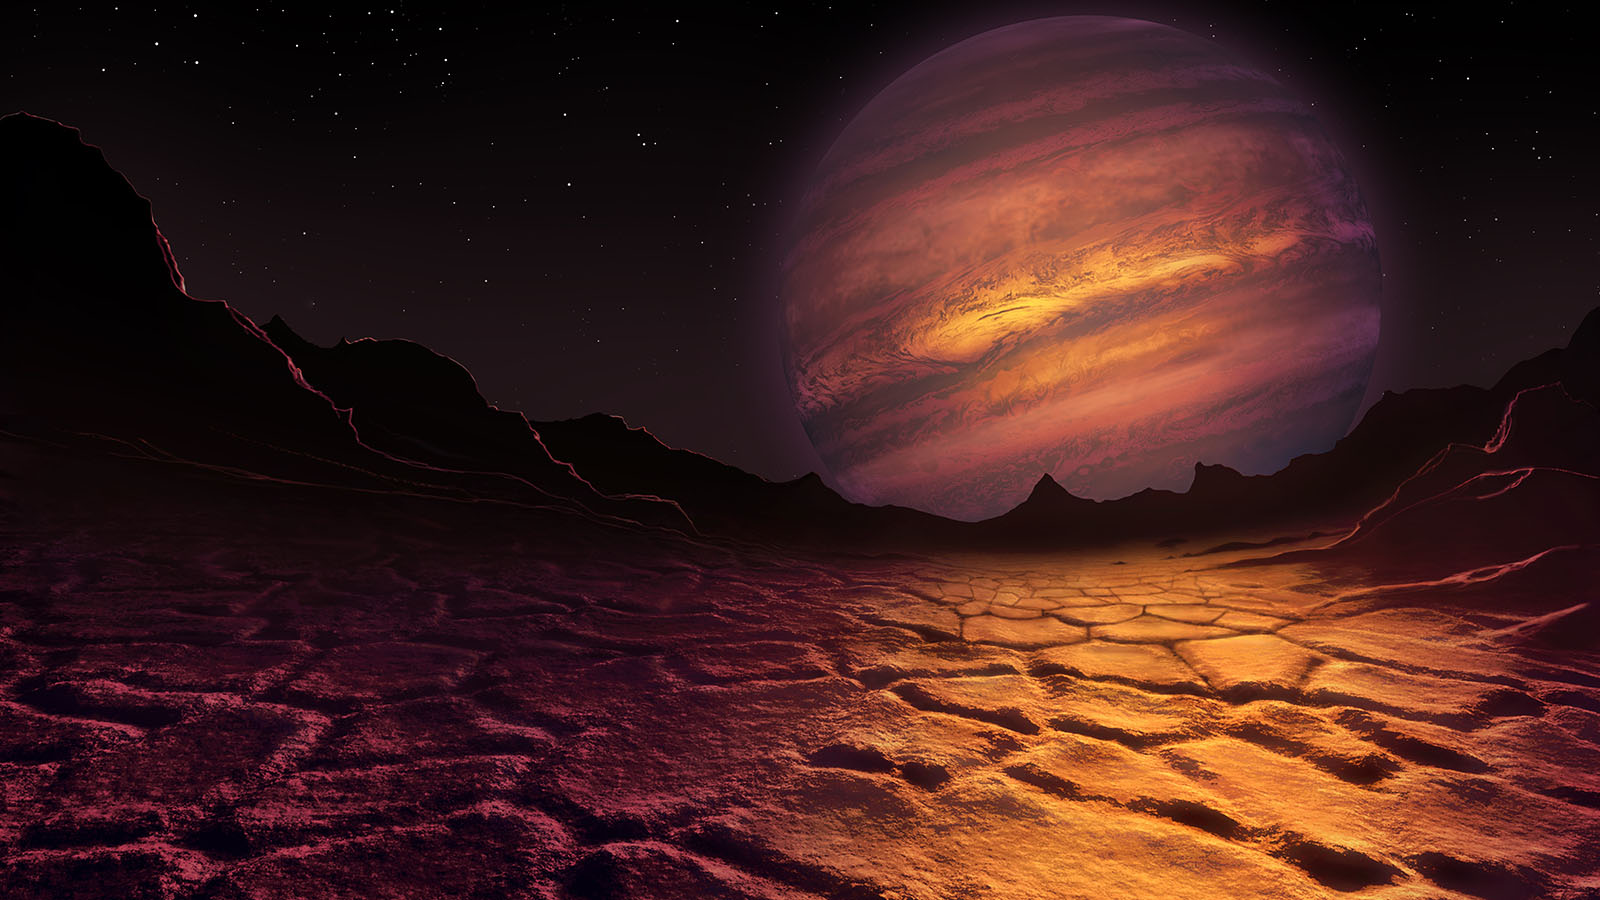 Art: View from planet around a brown dwarf